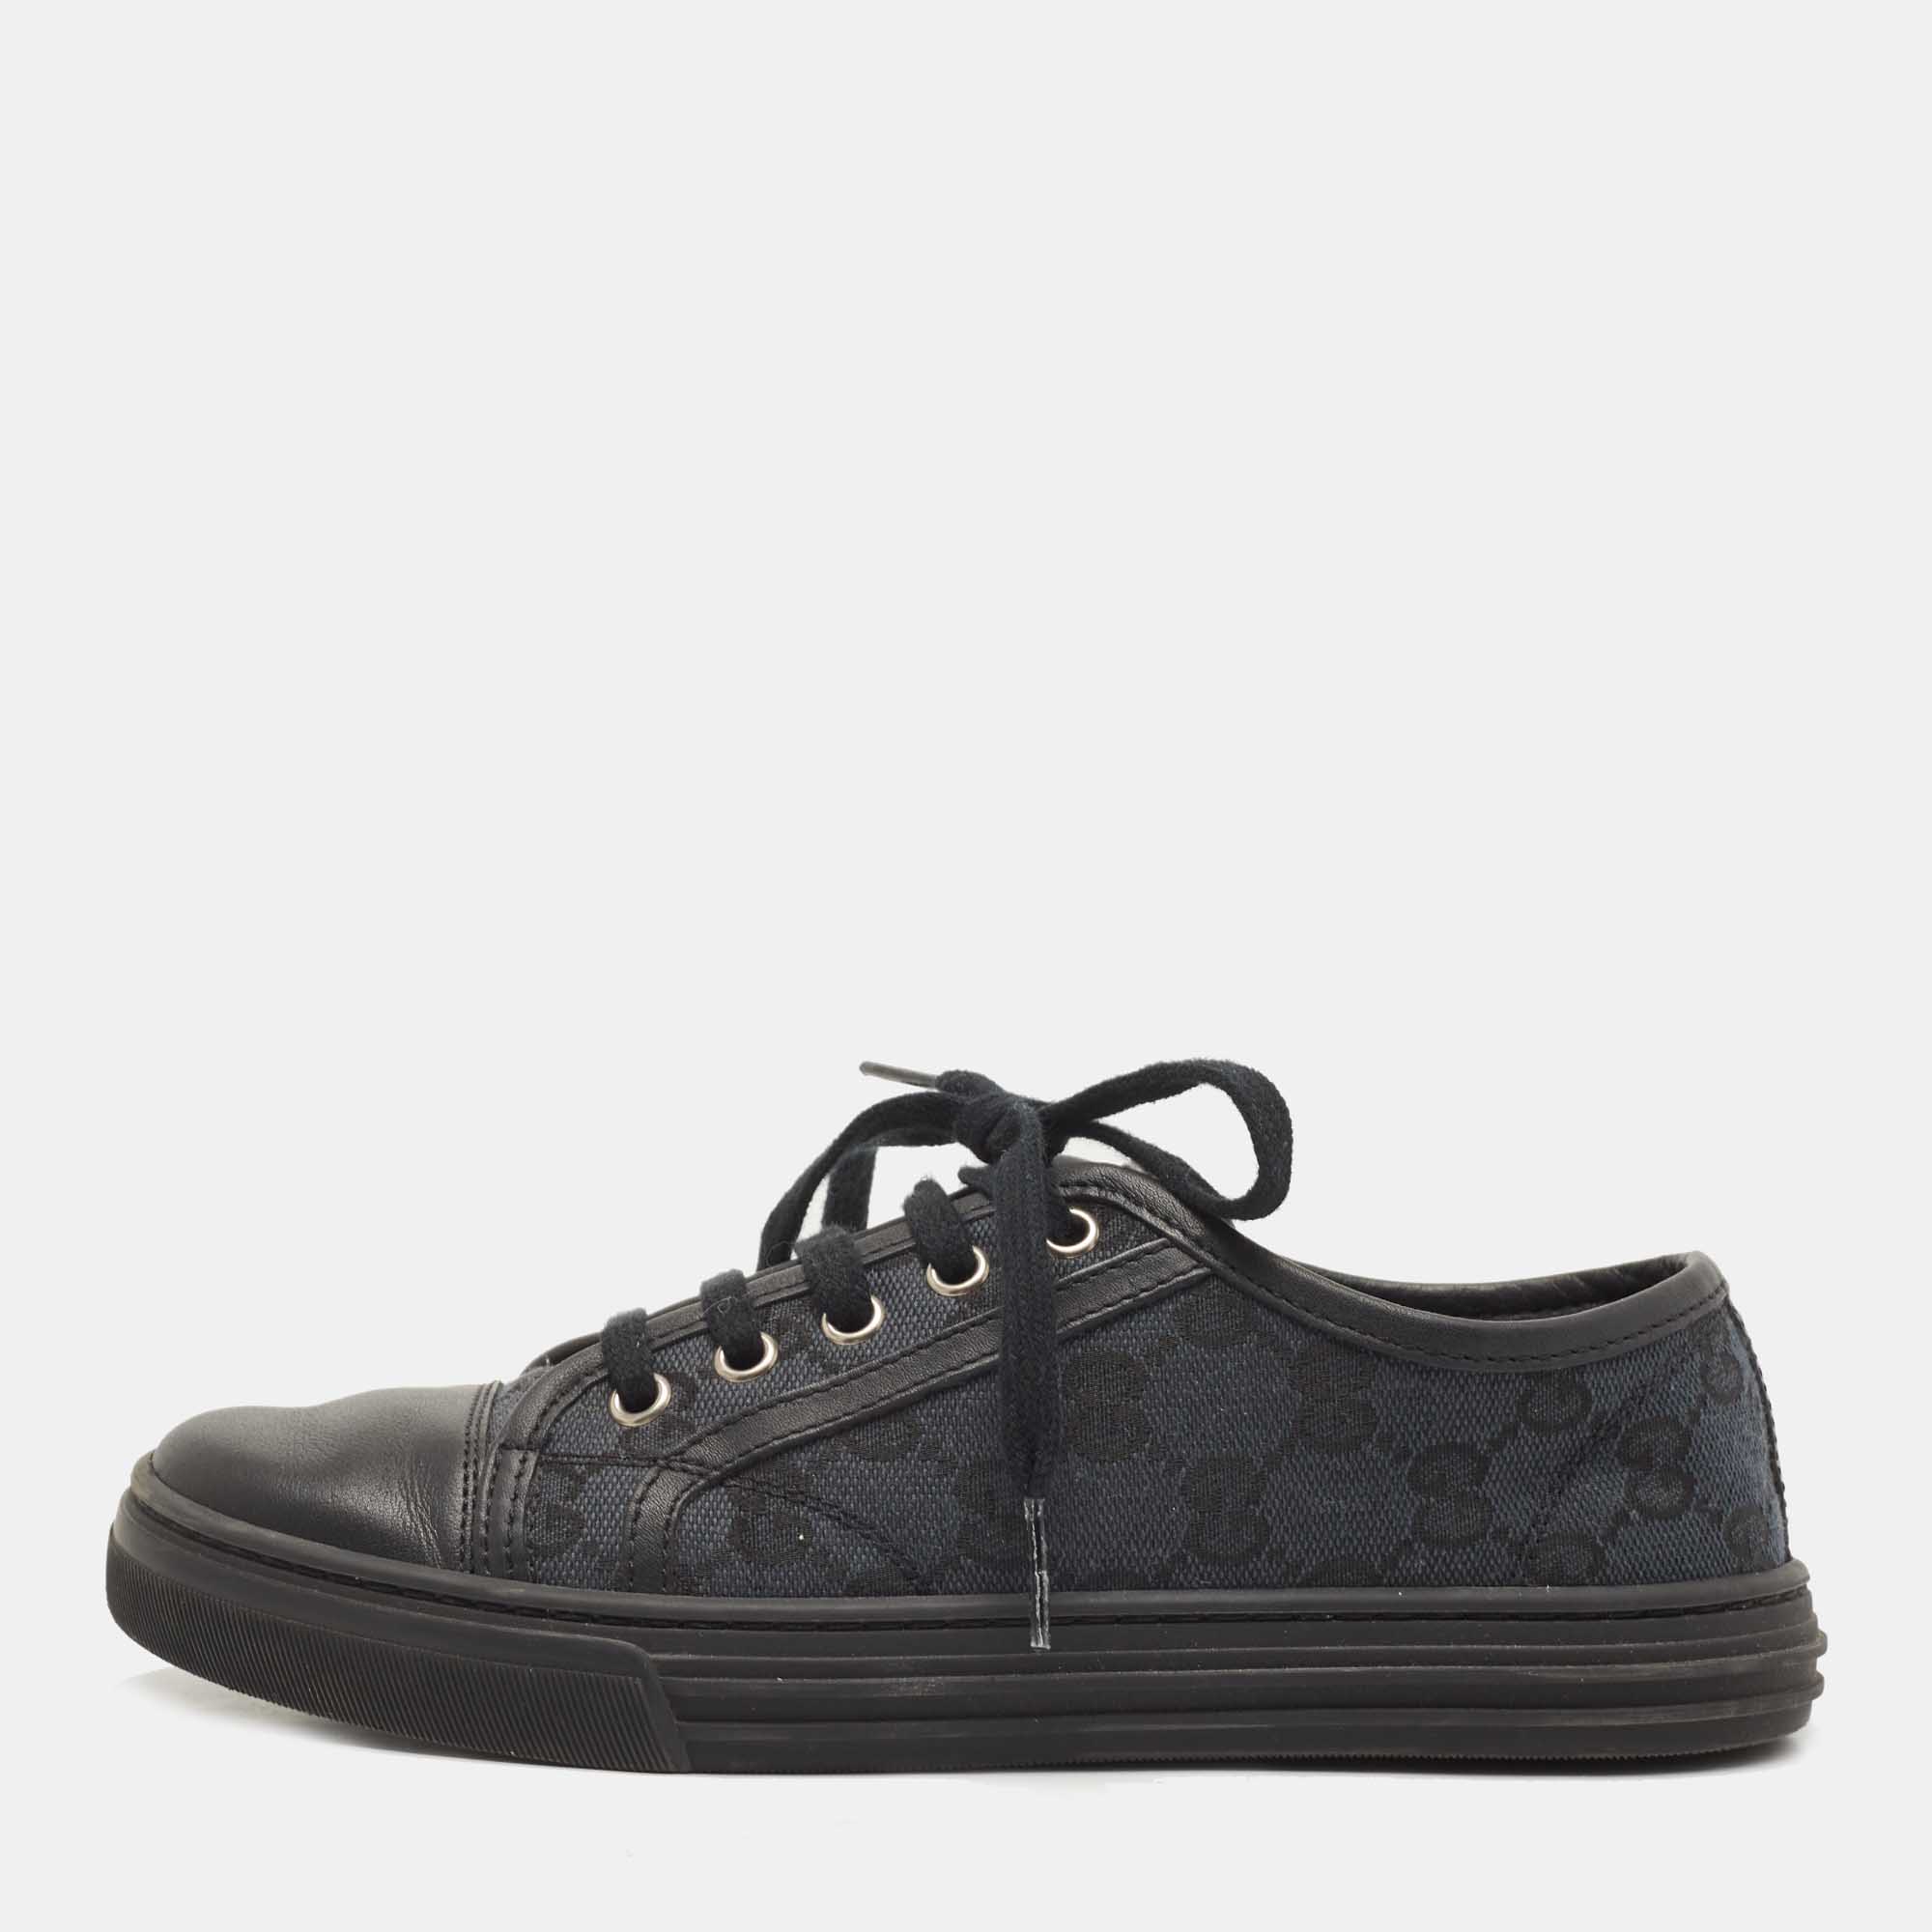 Gucci Black Canvas And Leather GG Low Top Sneakers Size 36